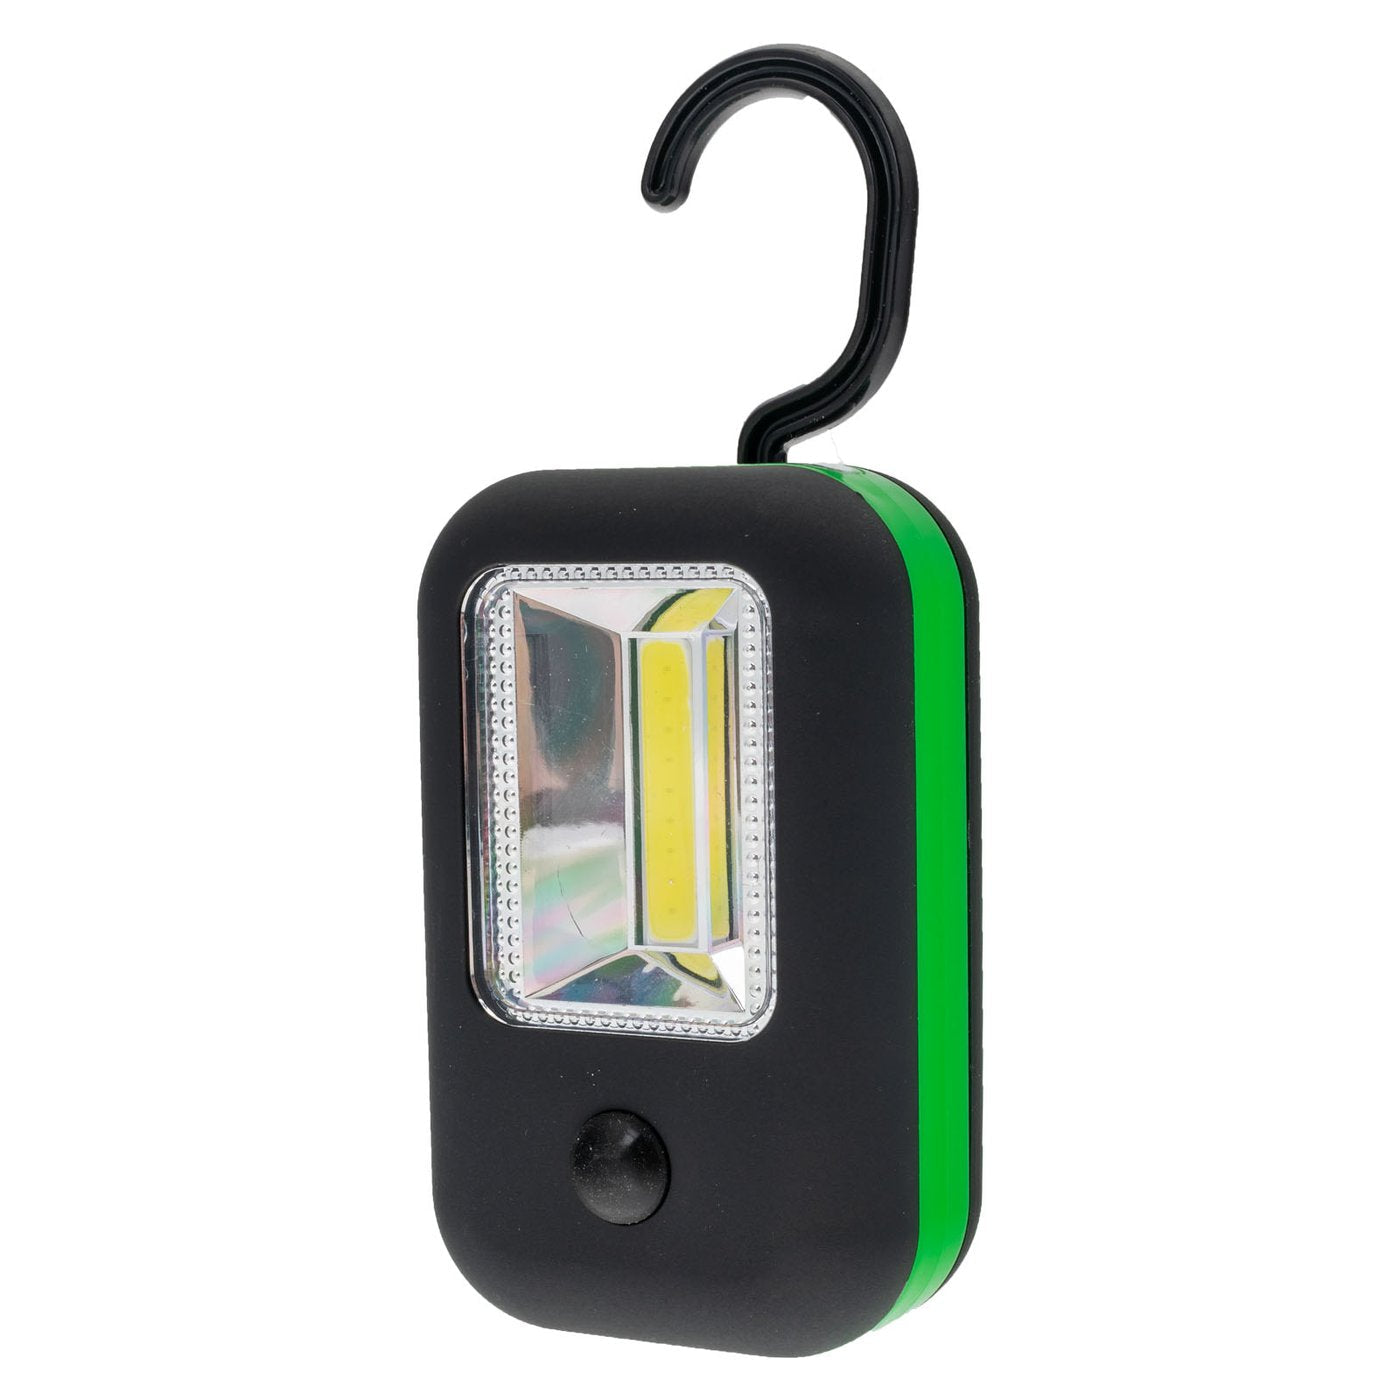 LitezAll | Ultra-Bright COB LED Compact Work Light With Magnetic Attachment & Adjustable Hook, Flashlight, LitezAll, Defiance Outdoor Gear Co.